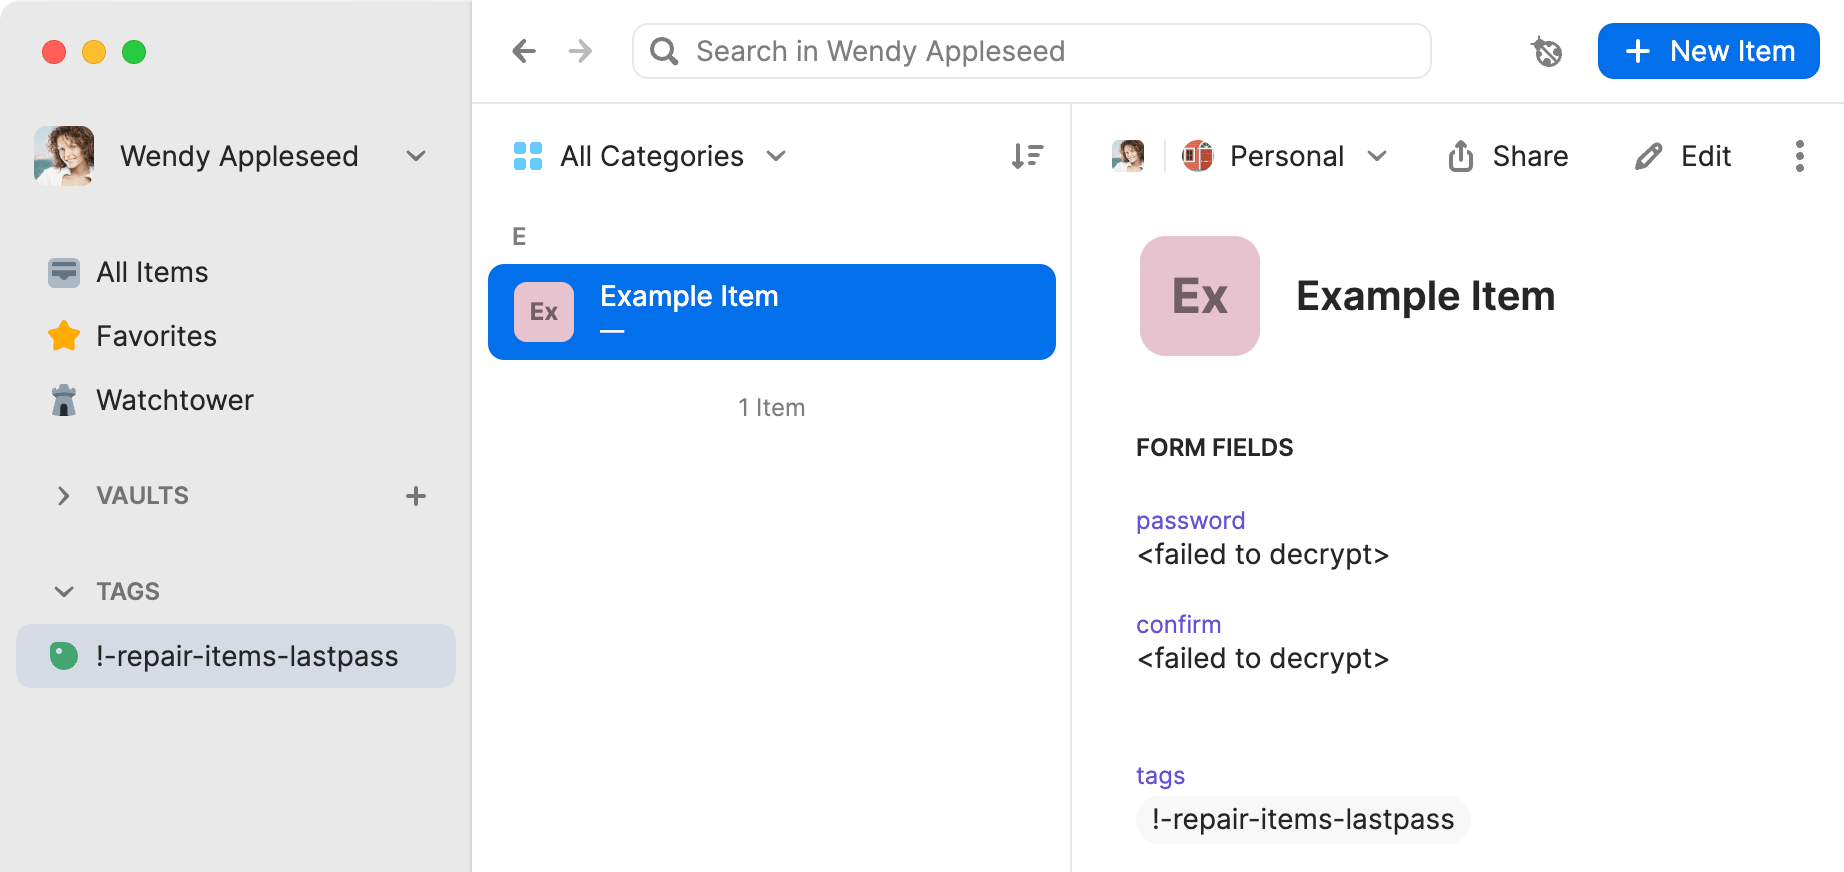 The 1Password desktop app displaying an item called "Example Item" with two fields that contain the <failed to decrypt> value.